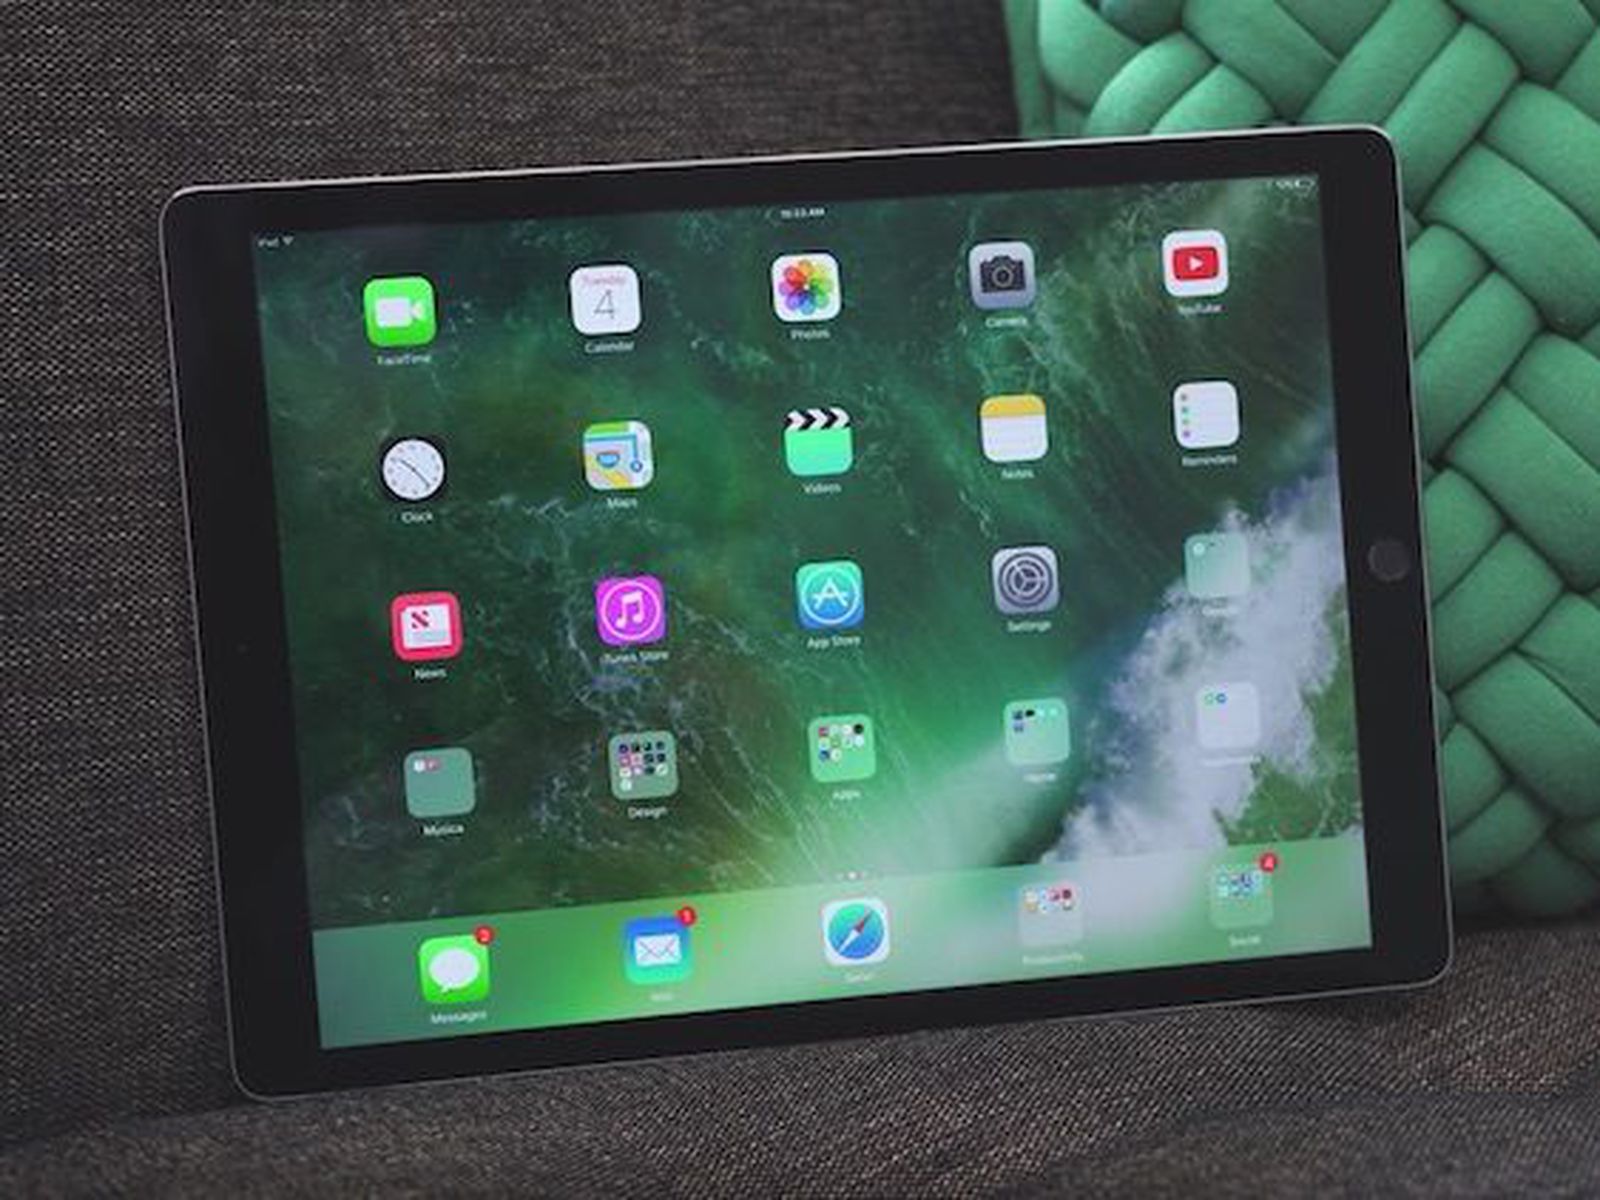 Apple rumored to launch new 10.9-inch iPad with edge-to-edge screen